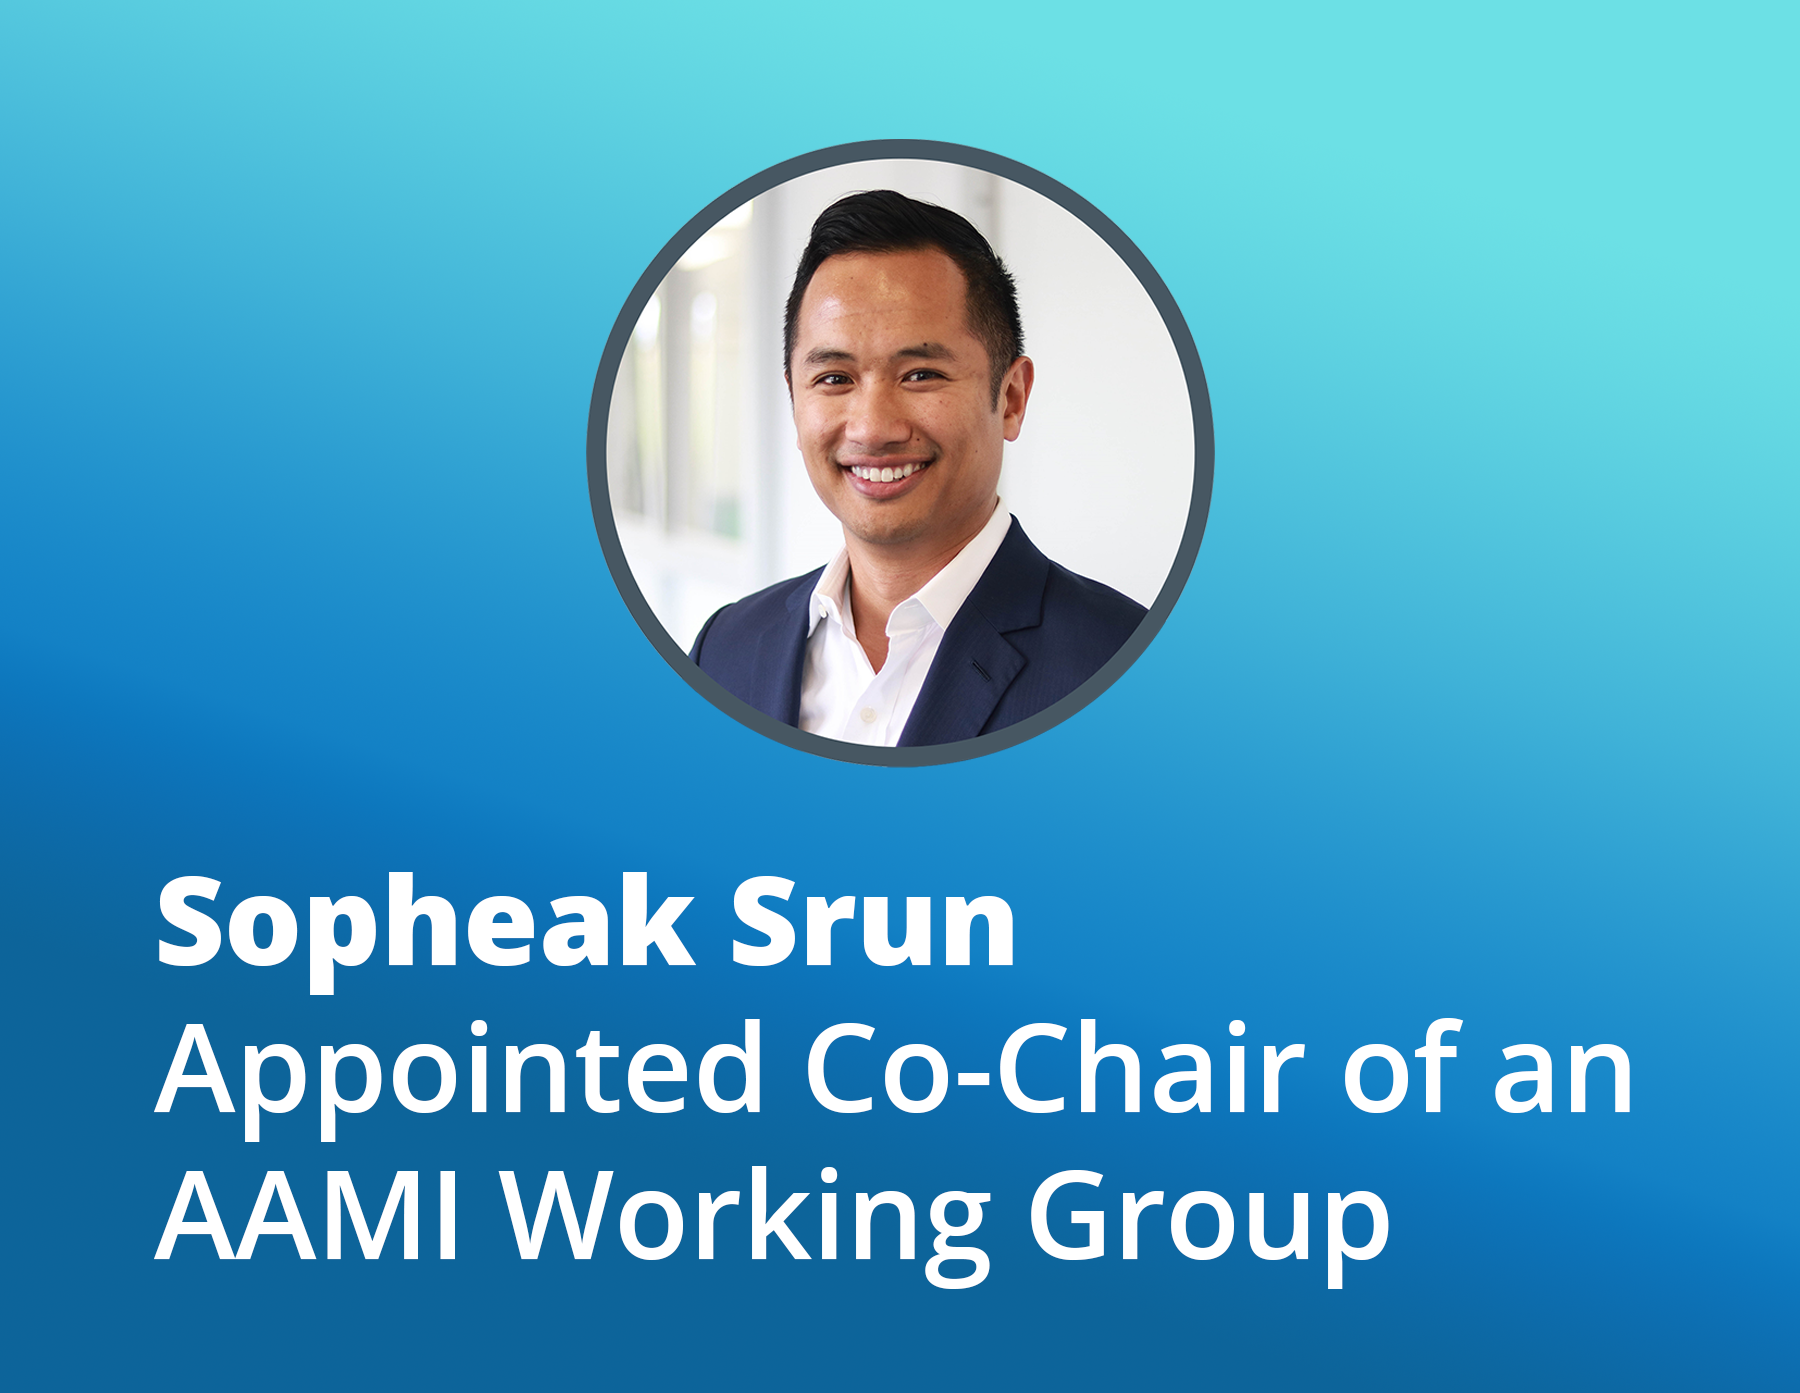 Sopheak Srun Appointed Co-Chair of an AAMI Working Group